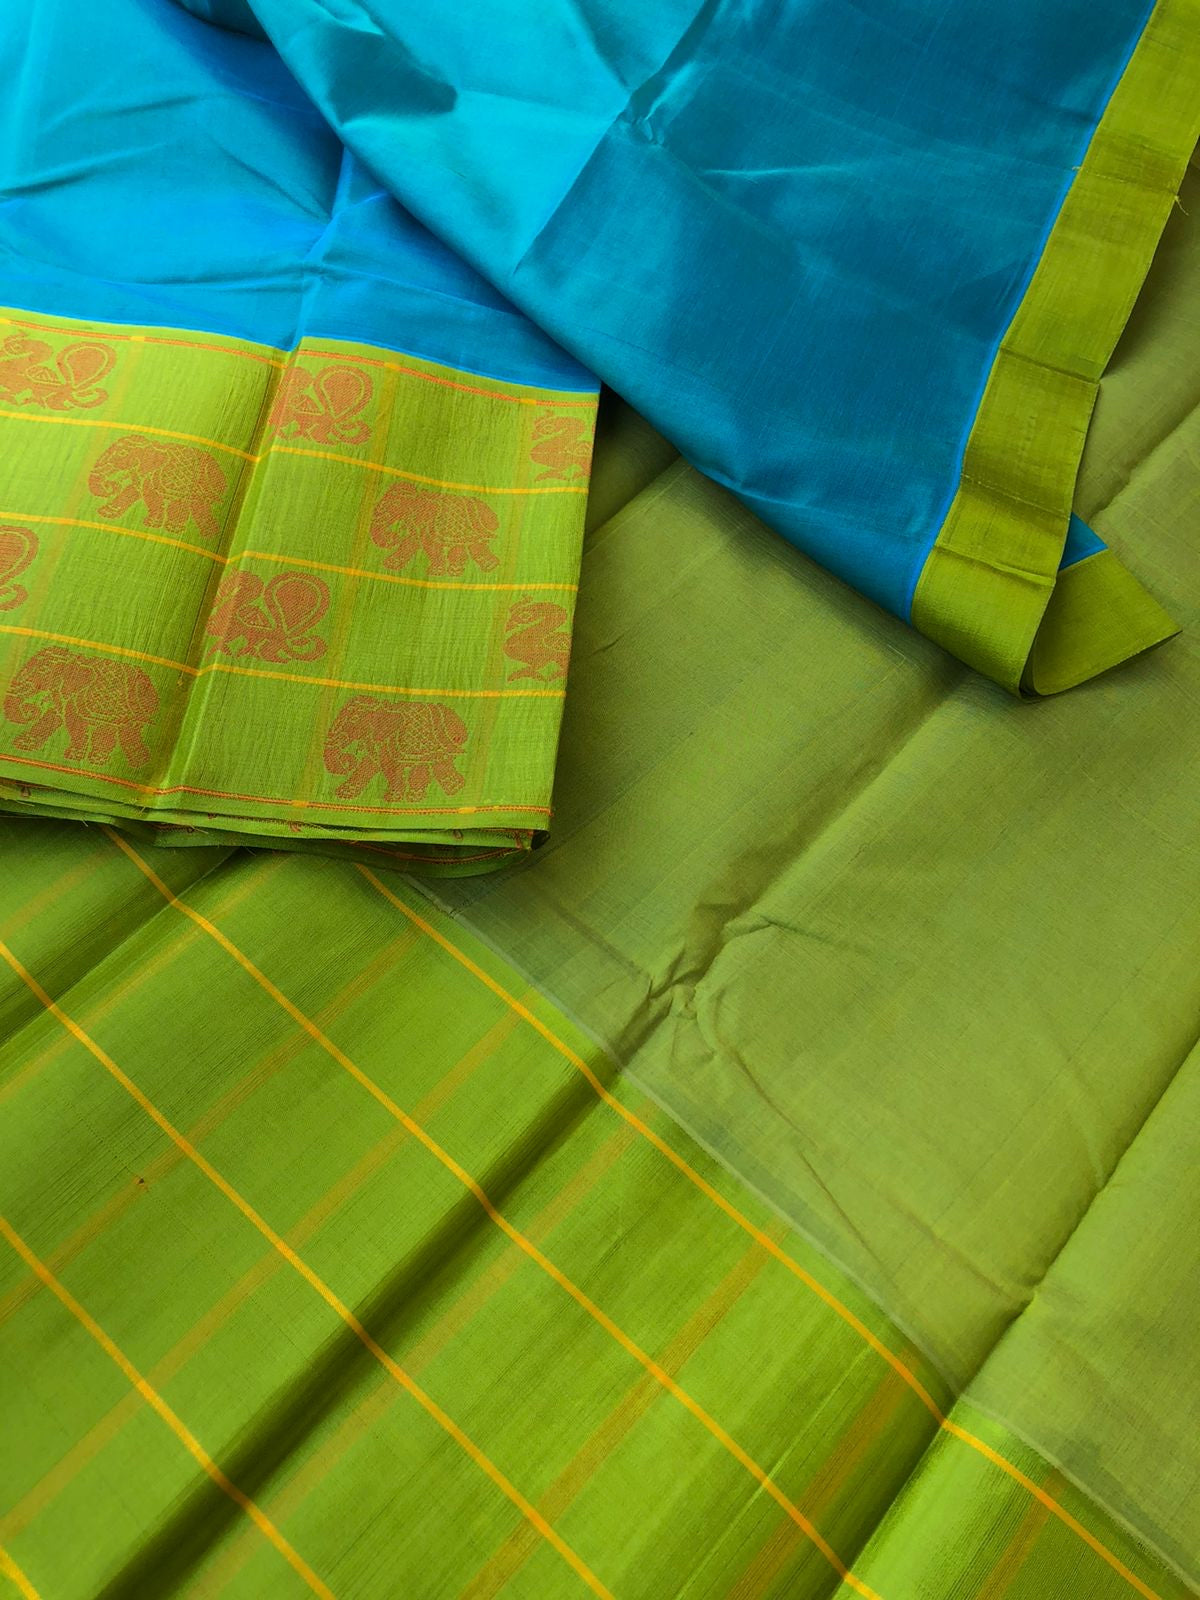 Korvai Silk Cotton with Pure Silk Woven Borders - ram blue and green